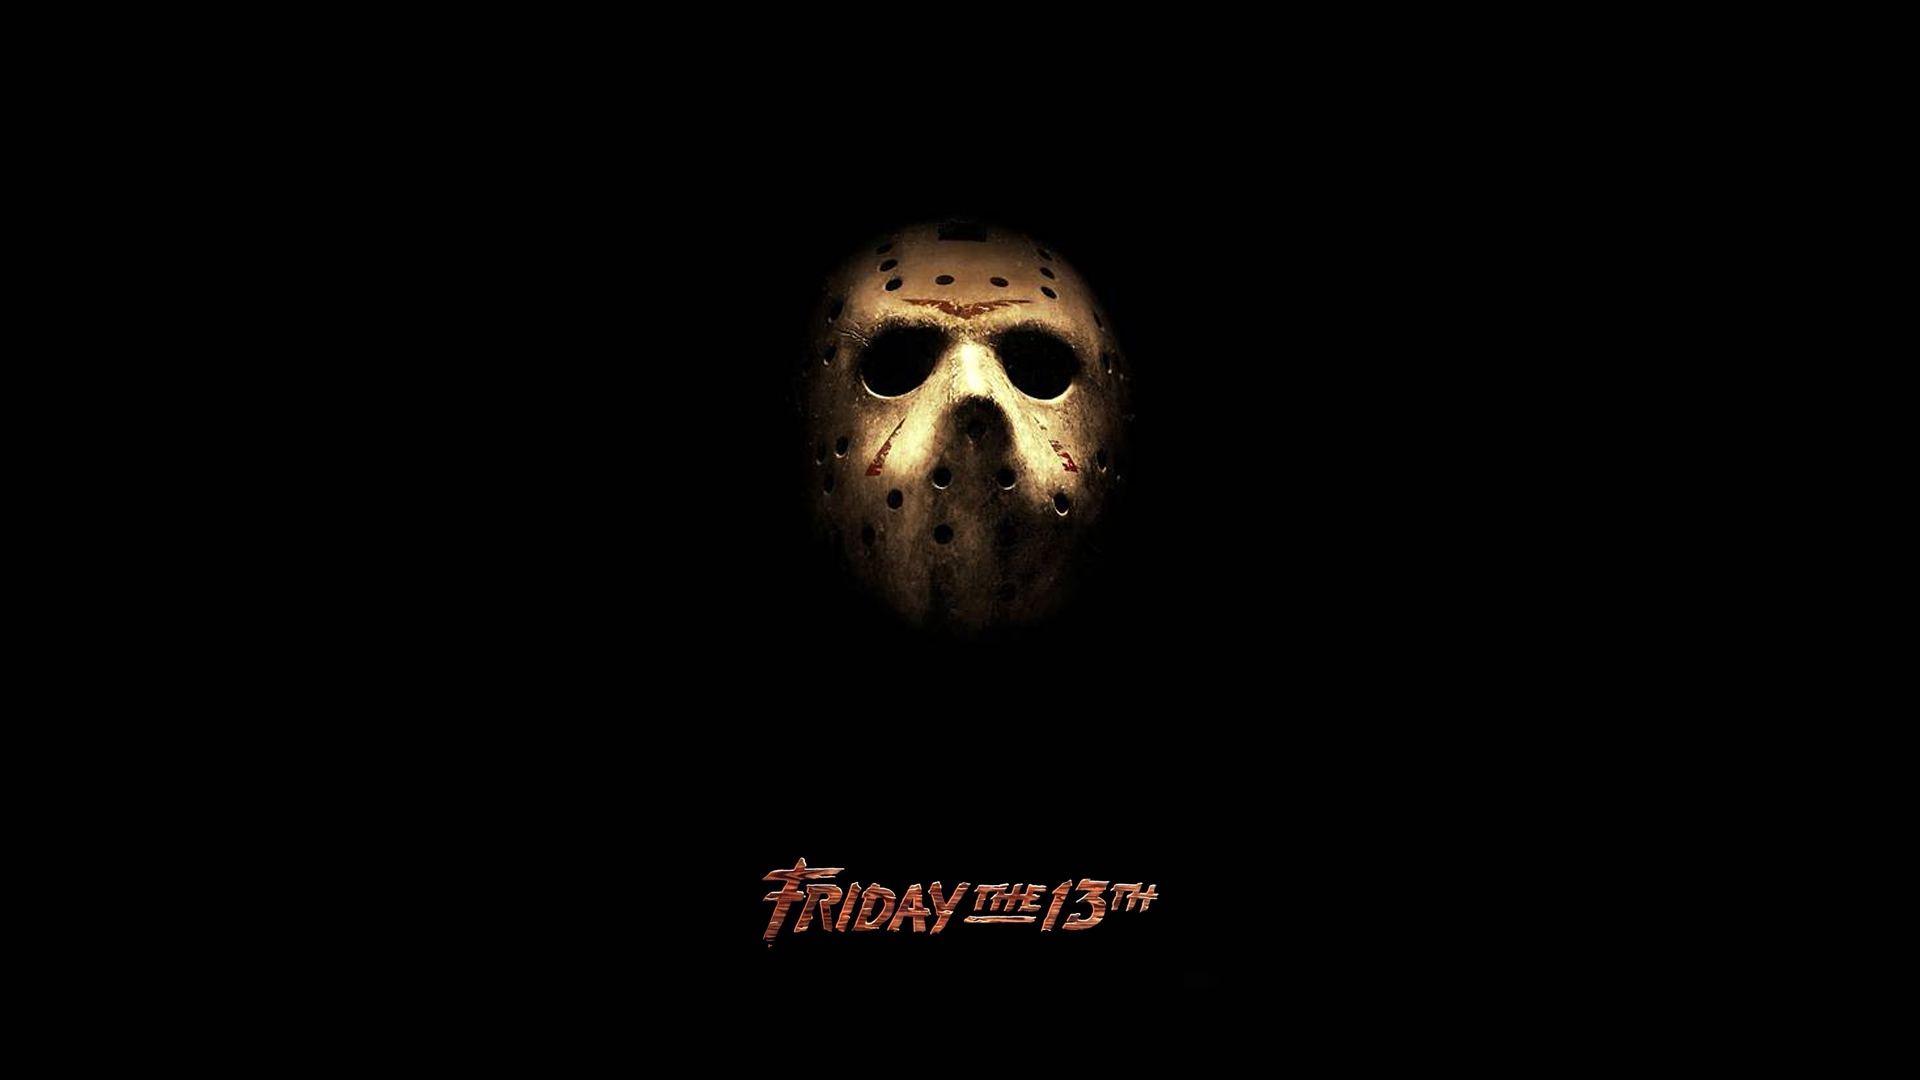 friday the 13th (2009), movie